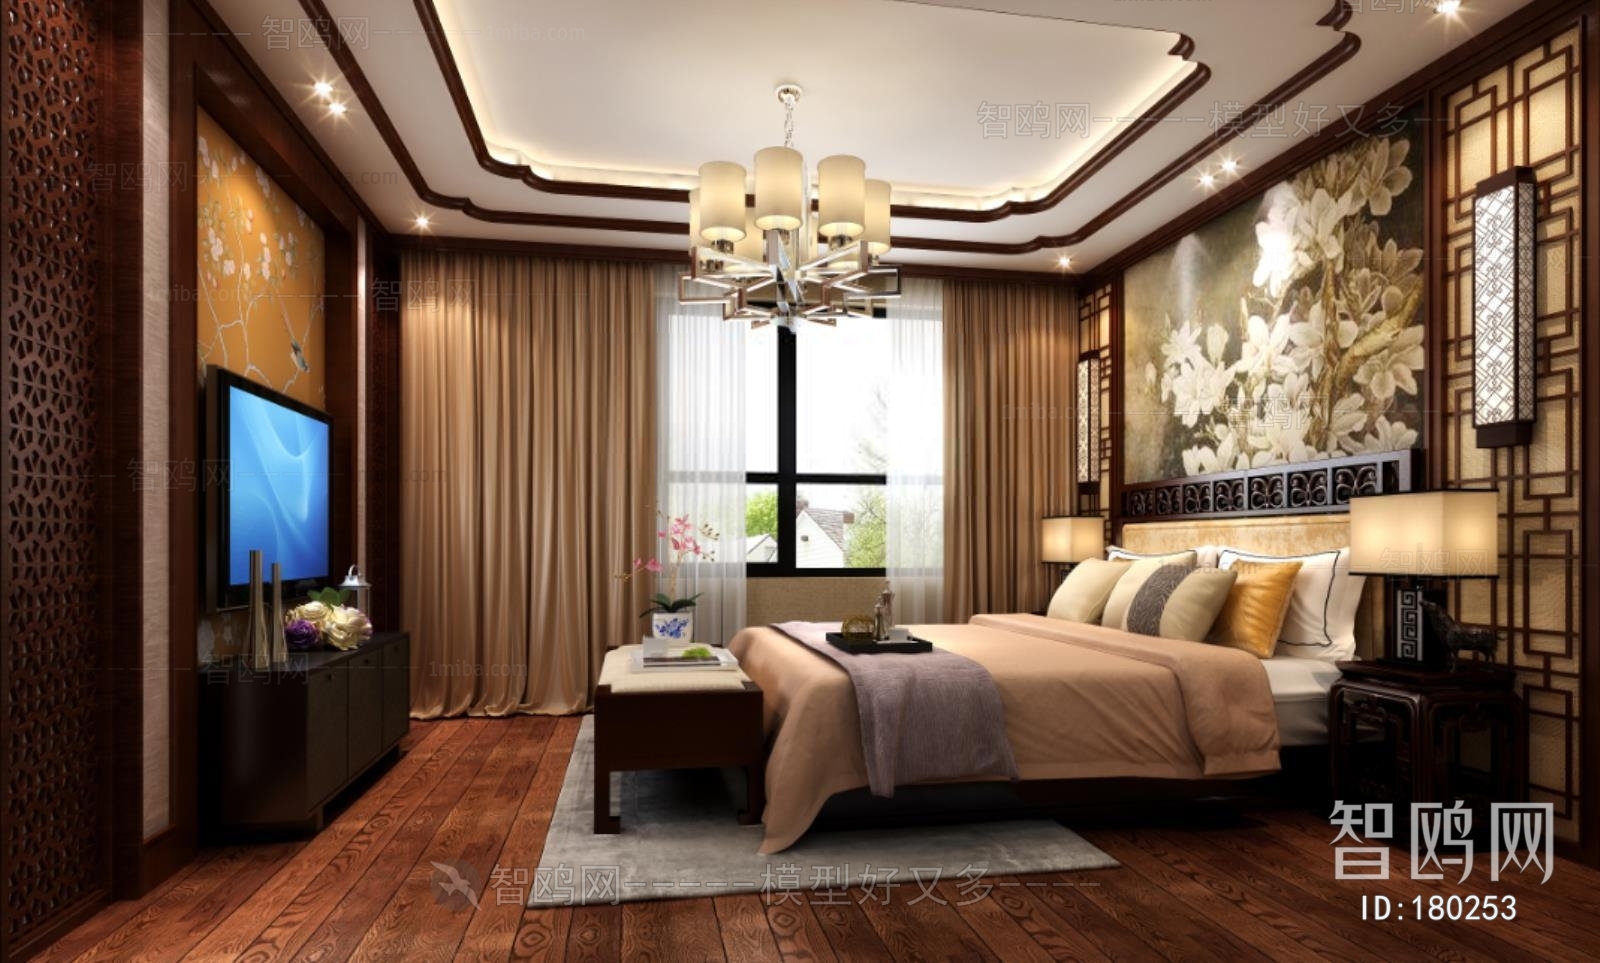 Chinese Style Bedroom